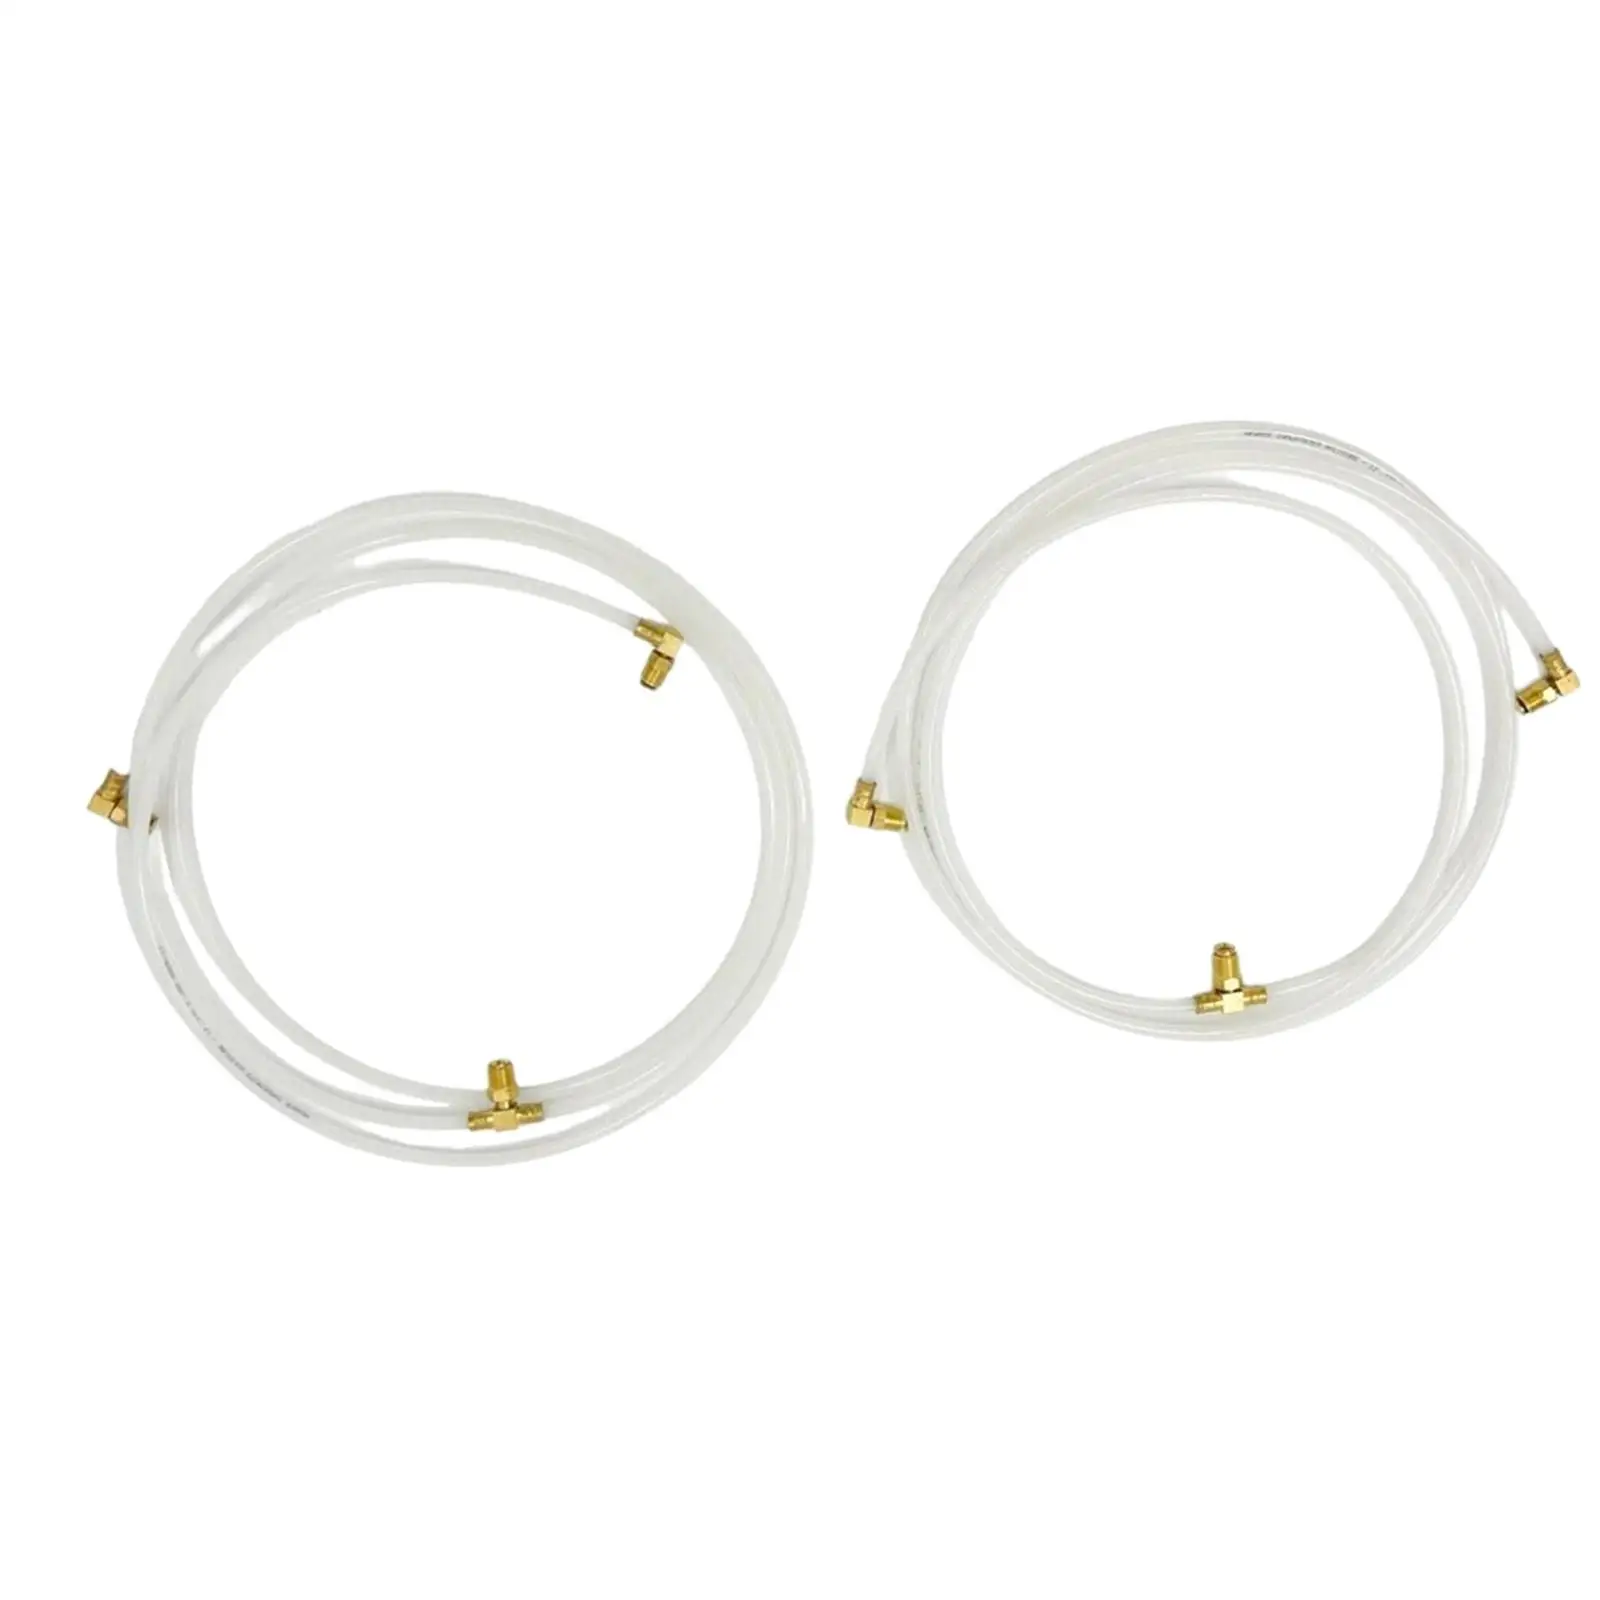 Pair Convertible Top Hydraulic Fluid Hose Lines Ho-white-set for Chevrolet Corvair Repair Part Easy Installation Durable